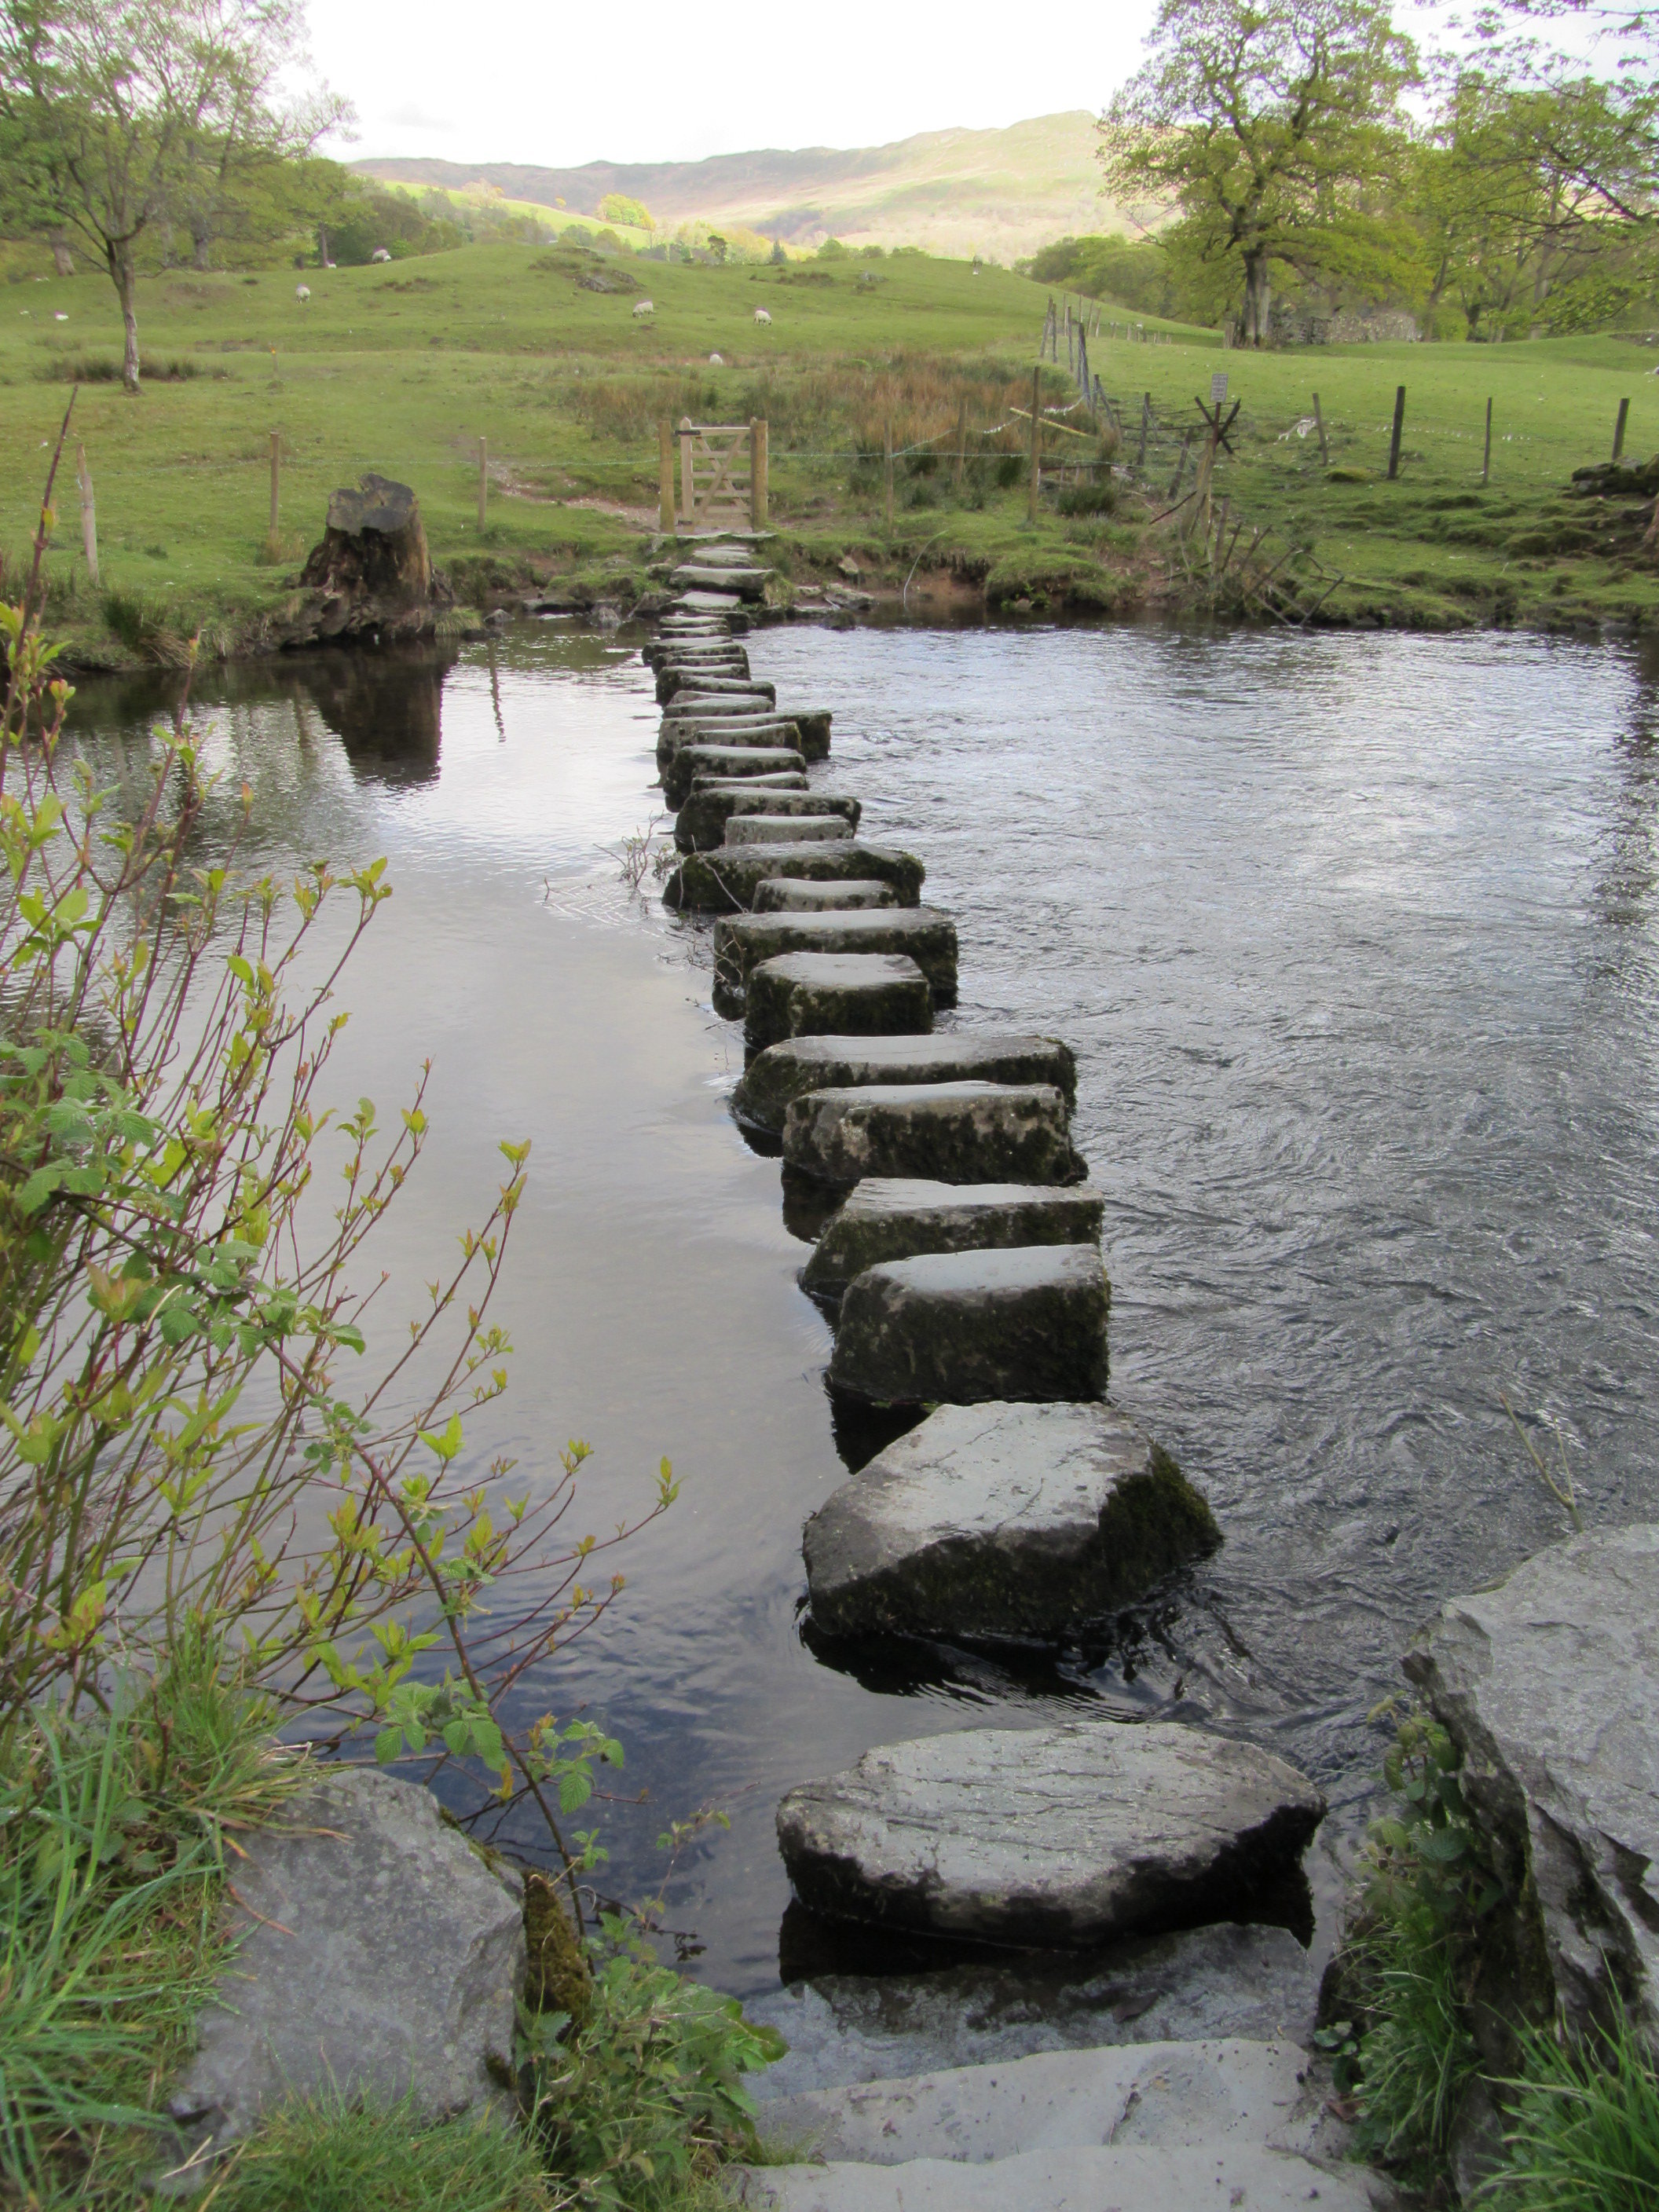 Stepping Stones file:river rothay stepping stones 120508w.jpg MUSEDHV